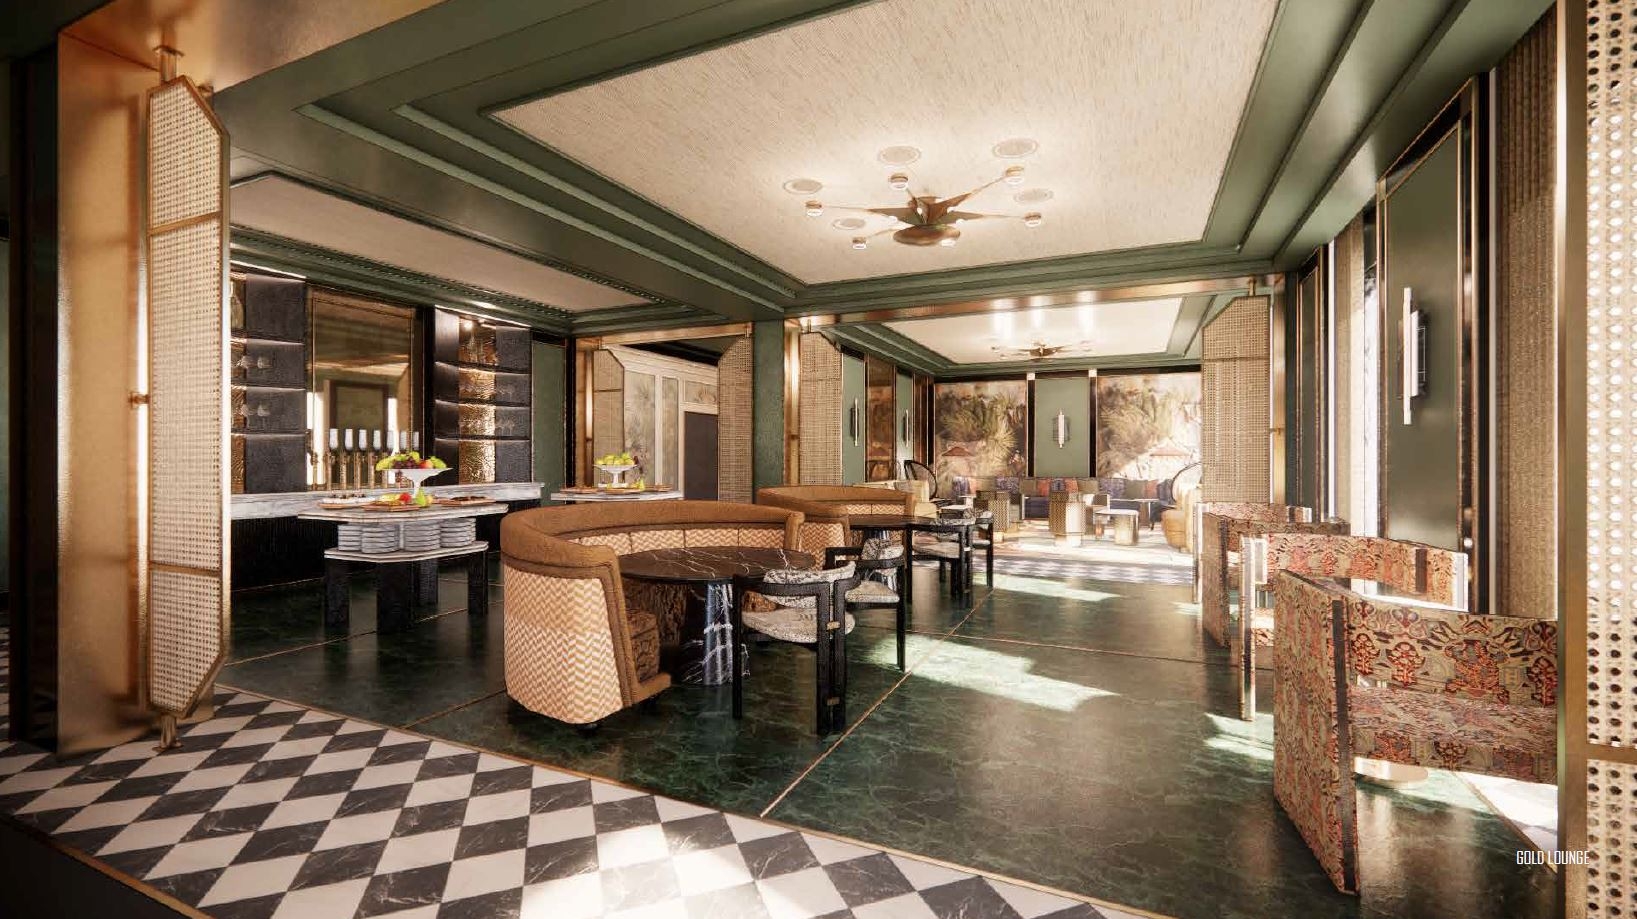 Fairmont returns to New Orleans with a historic twist